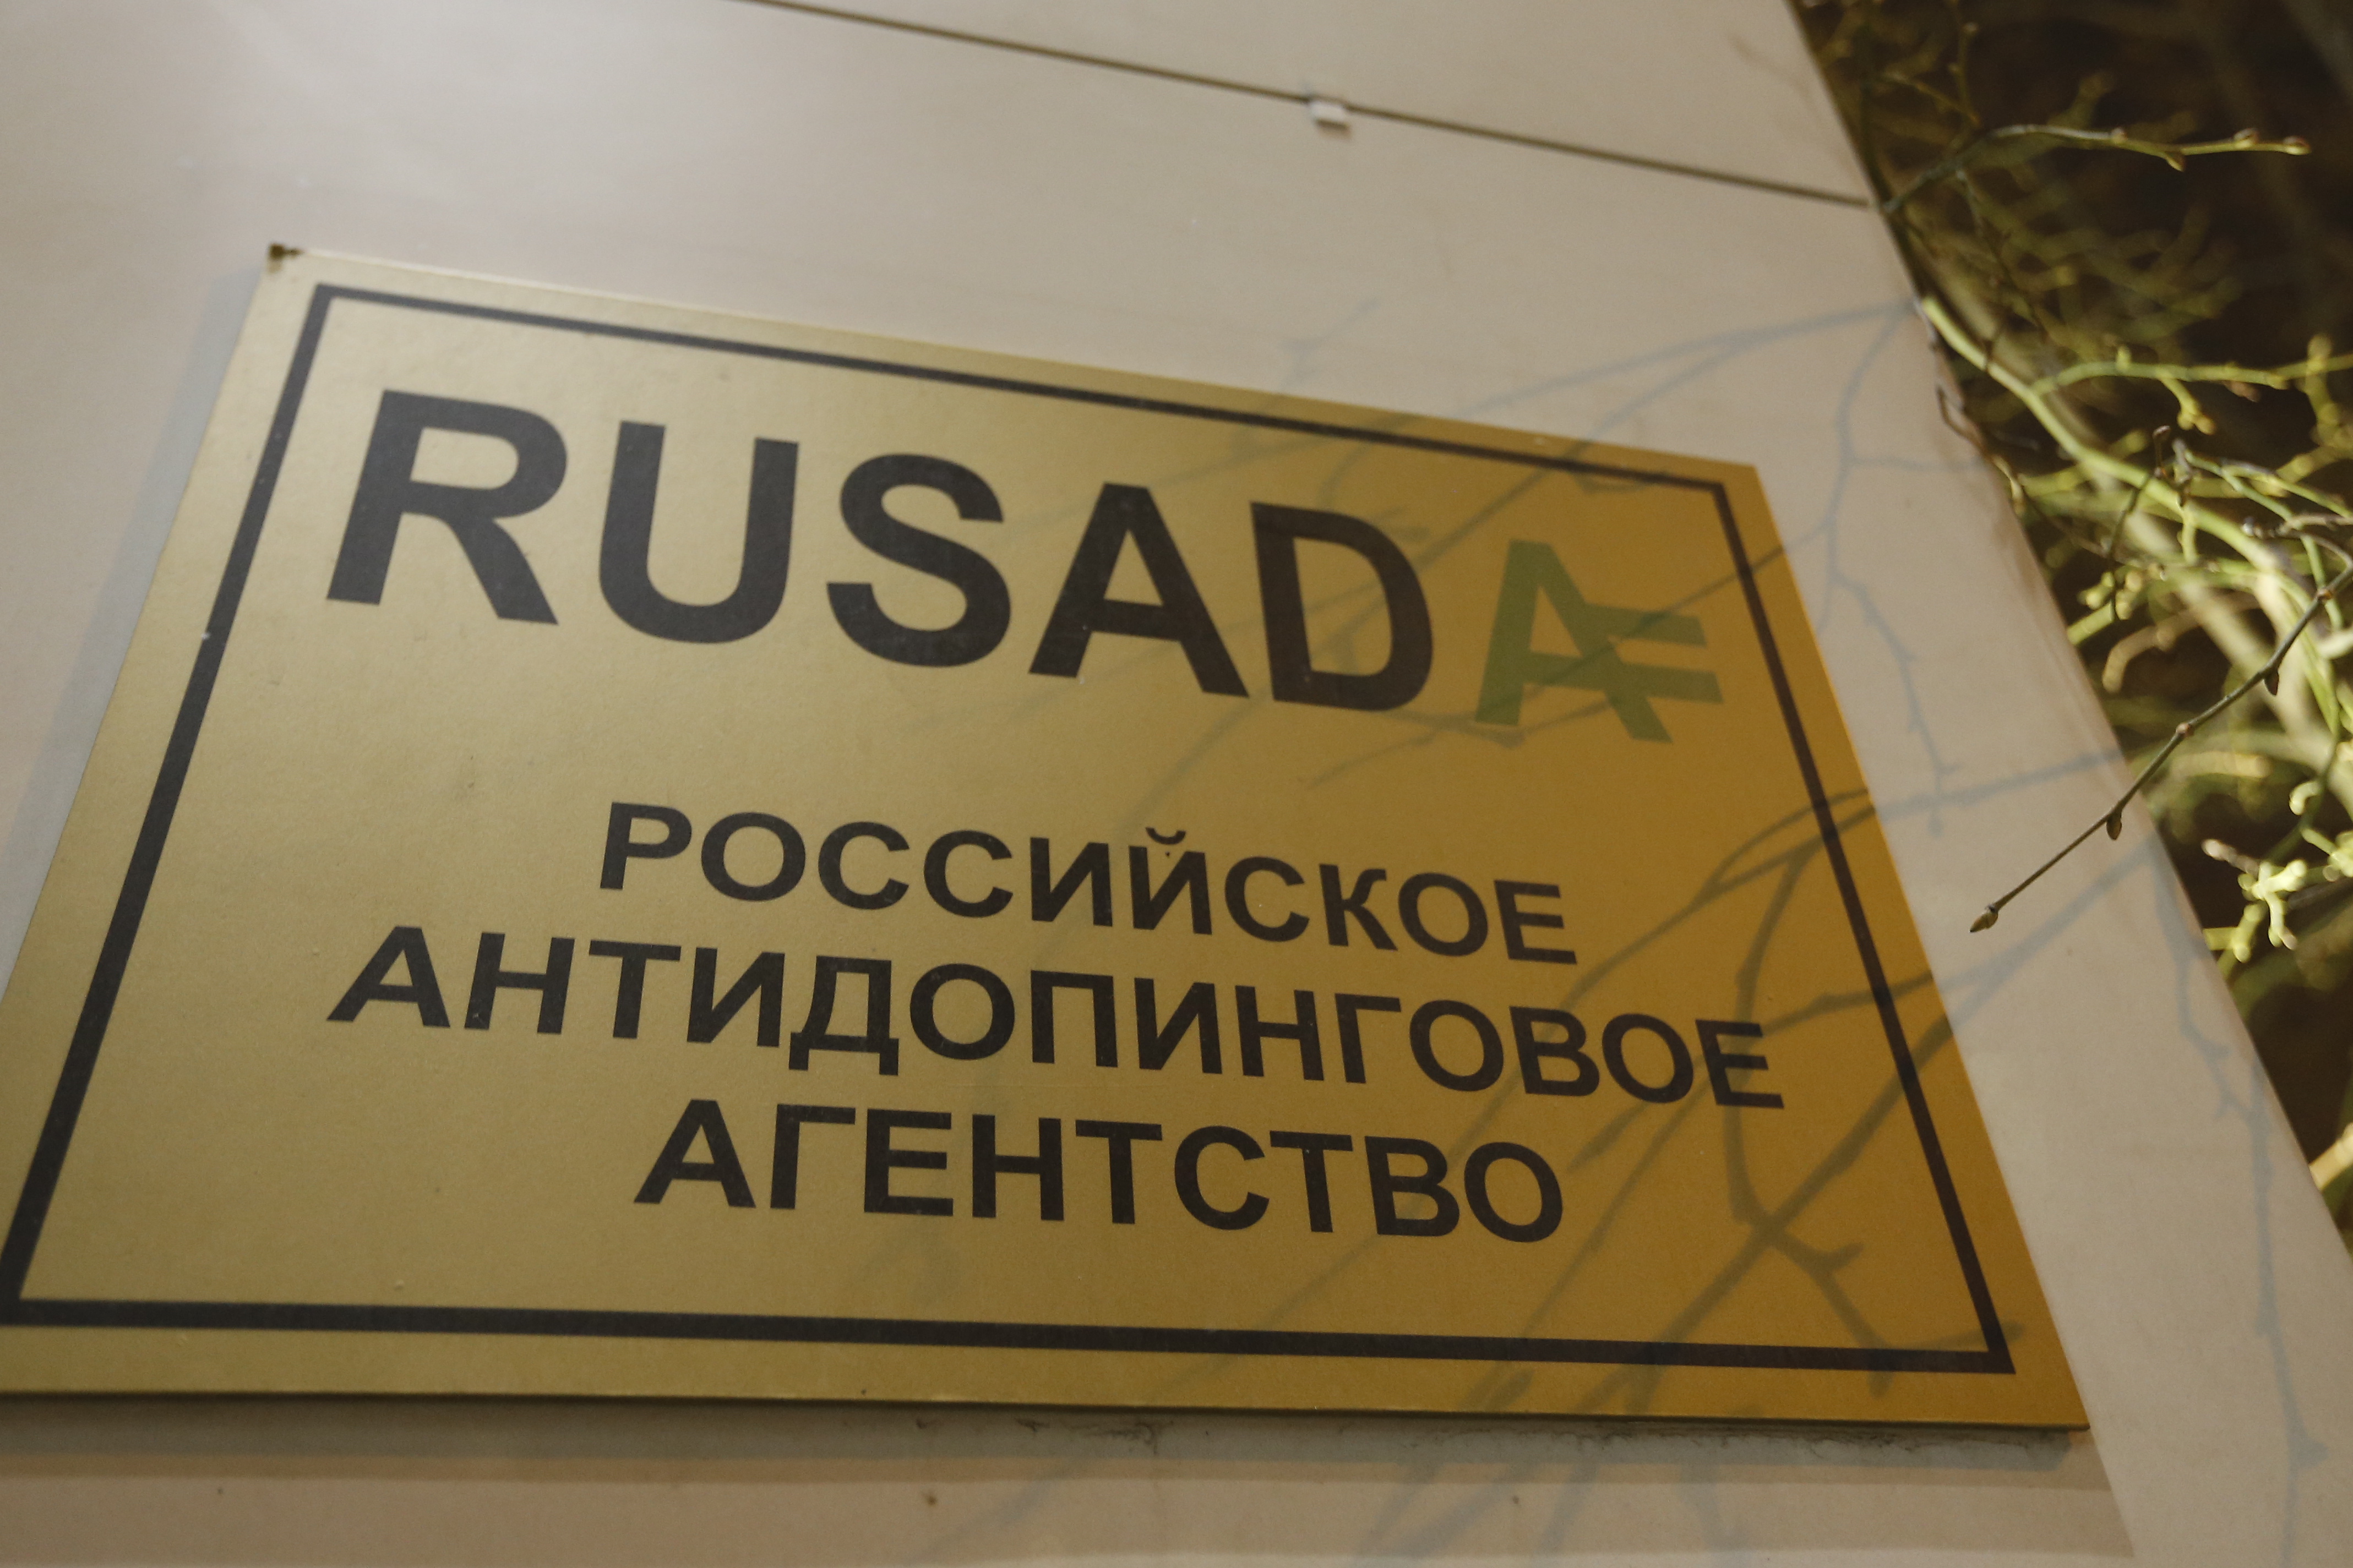 A plate on the building of Russia's antidoping agency, RUSADA, in Moscow on Jan. 20, 2016 (Alexander Shcherbak—Getty Images)